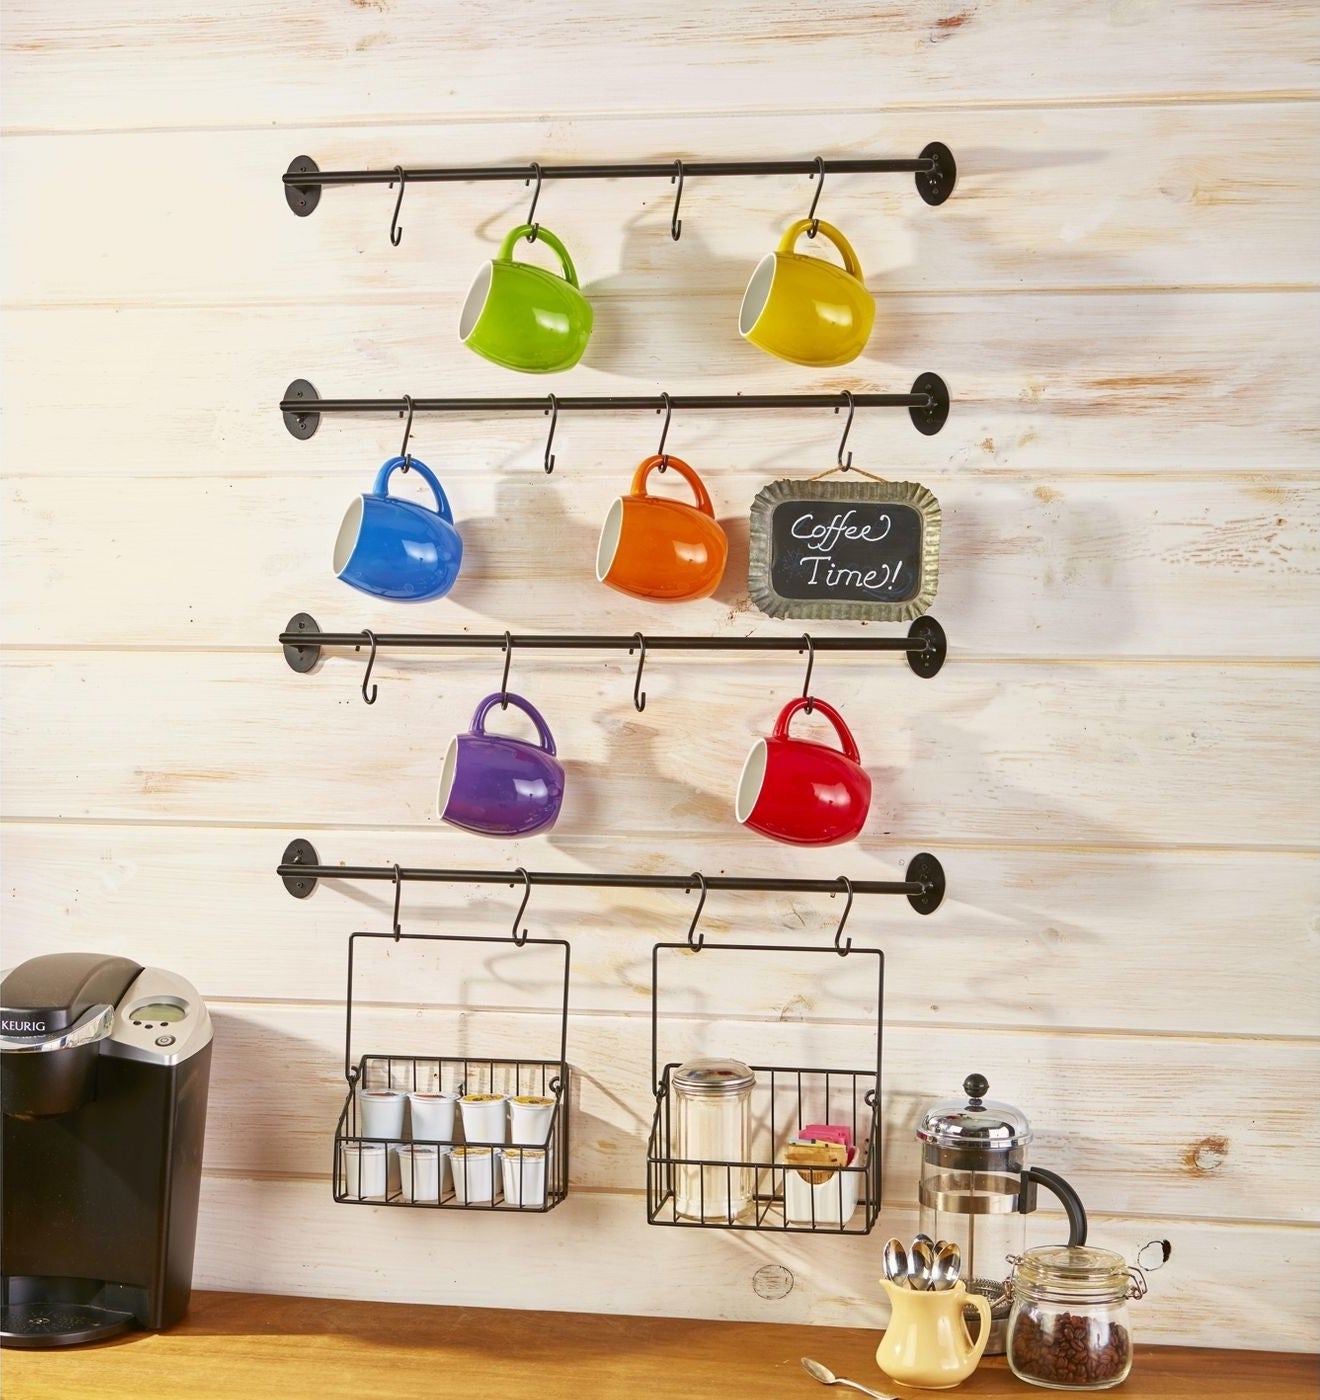 the hooks on a wall with mugs